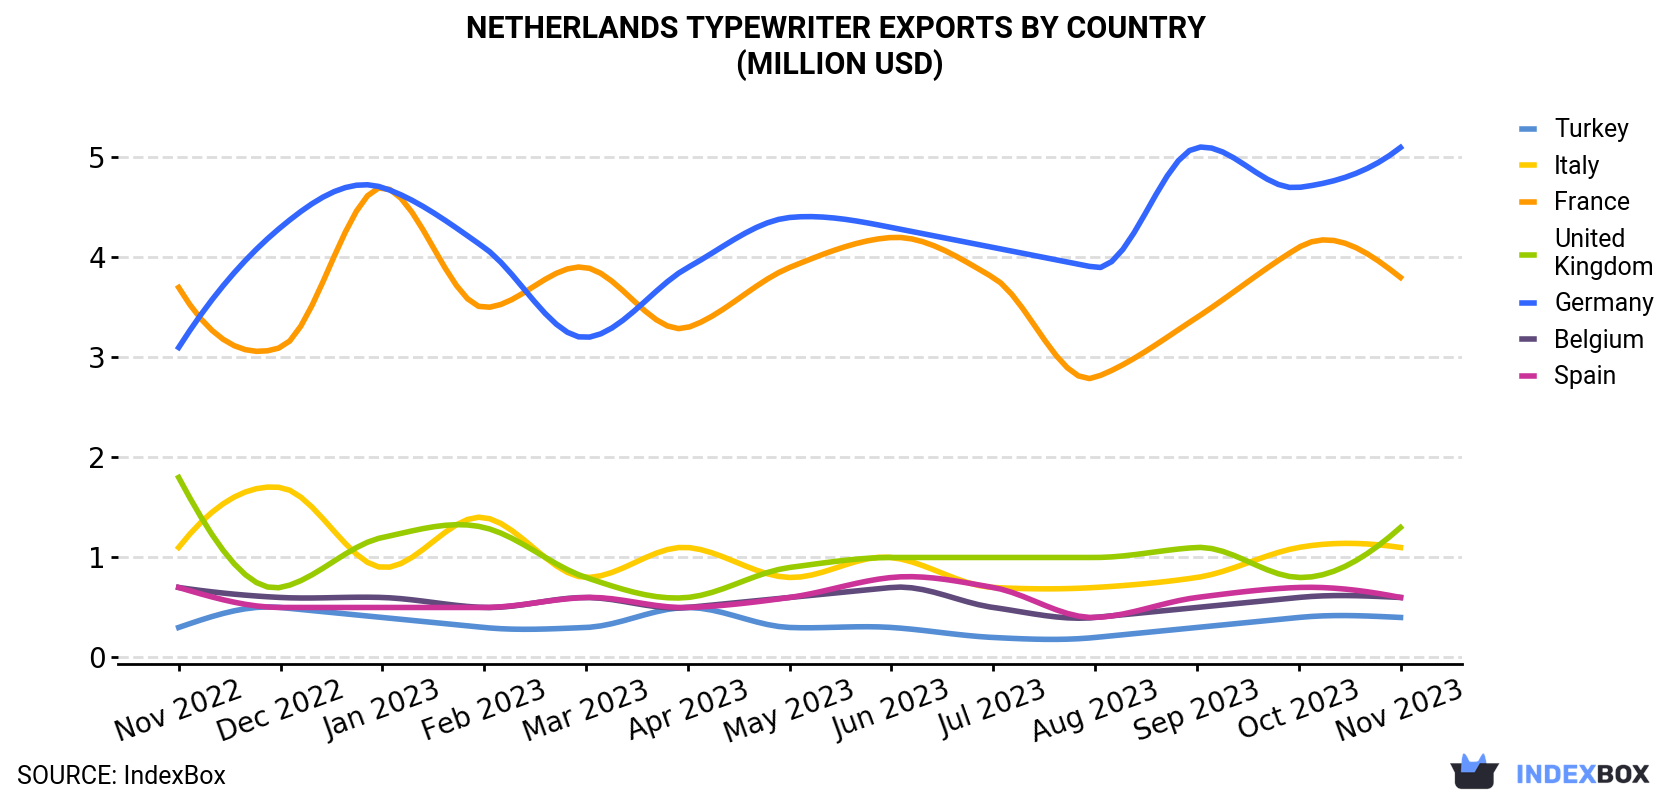 Netherlands Typewriter Exports By Country (Million USD)